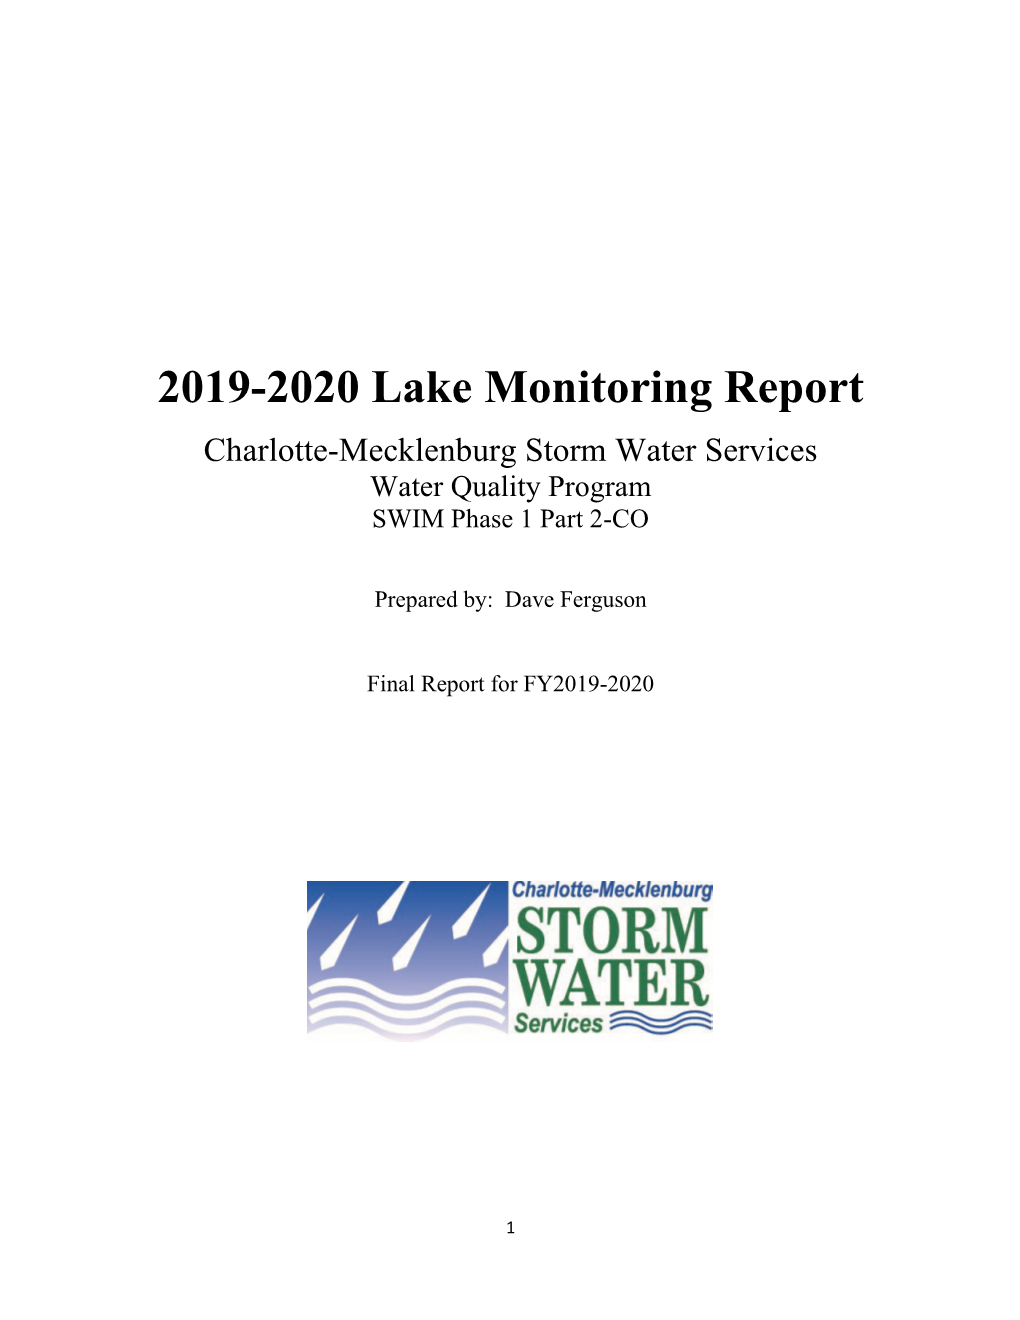 2019-2020 Lake Monitoring Report Charlotte-Mecklenburg Storm Water Services Water Quality Program SWIM Phase 1 Part 2-CO